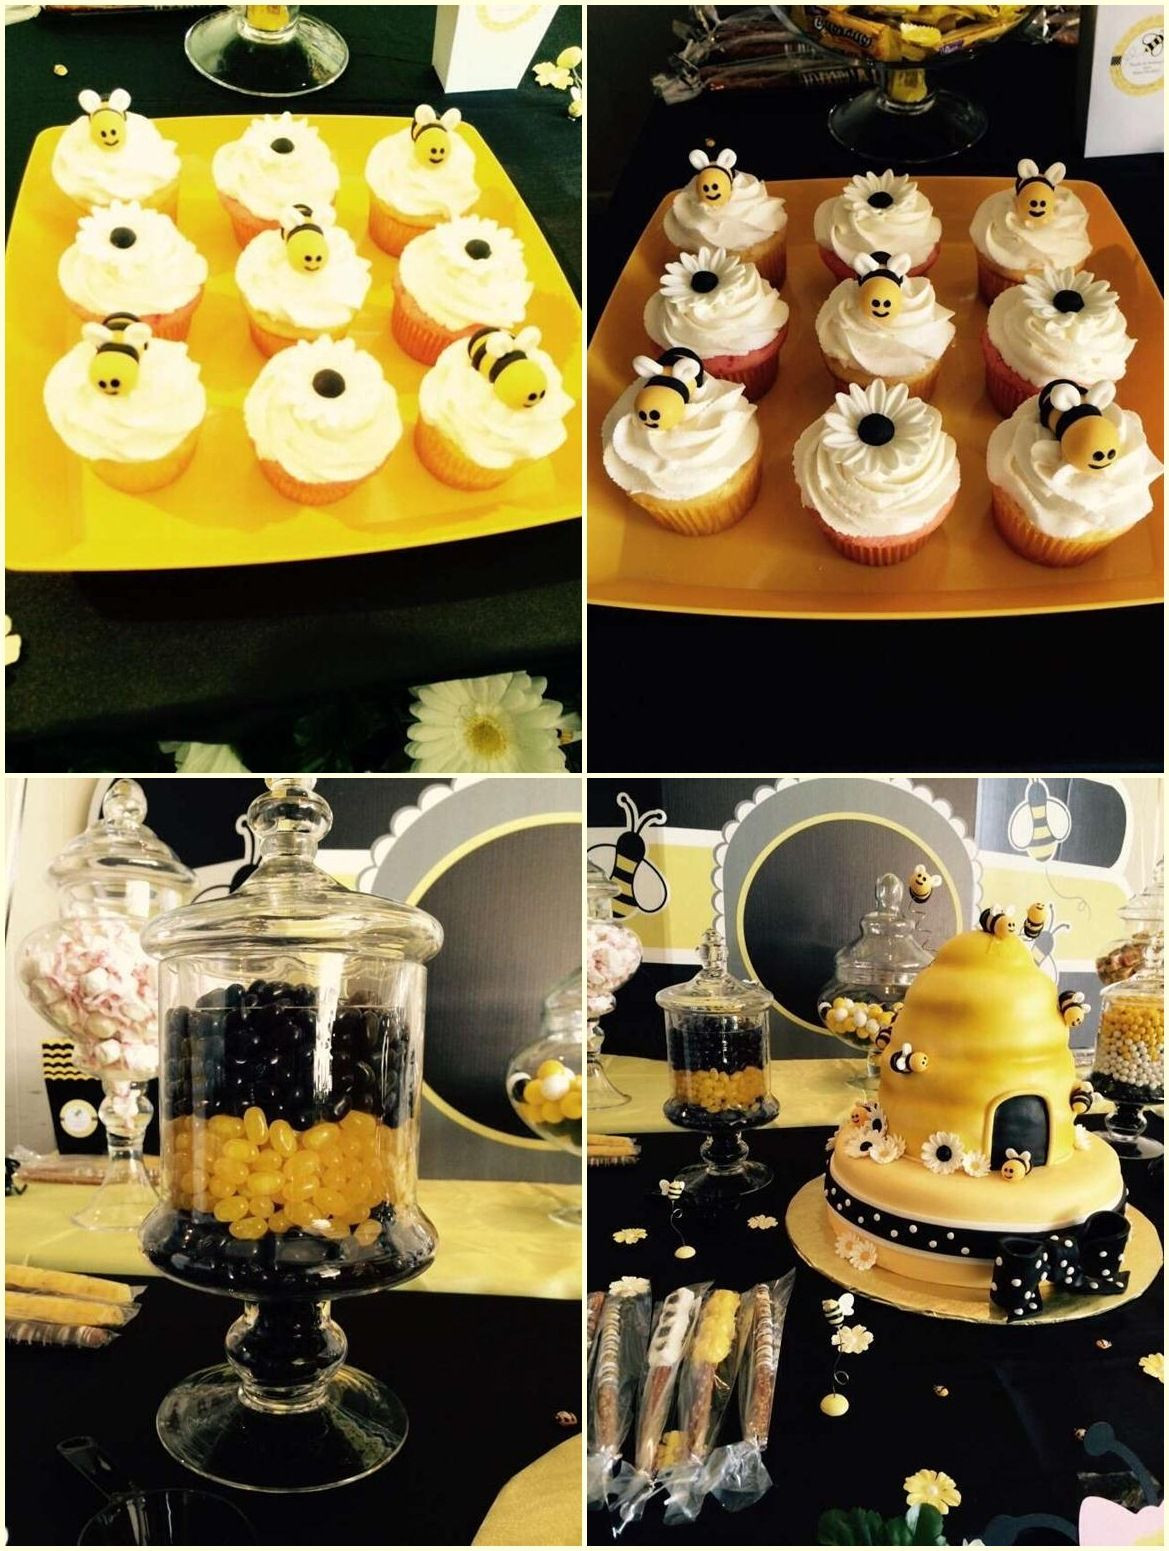 Bumble Bee Party Food Ideas
 Bumble Bee Party Food Ideas Bumble Bee Birthday Theme